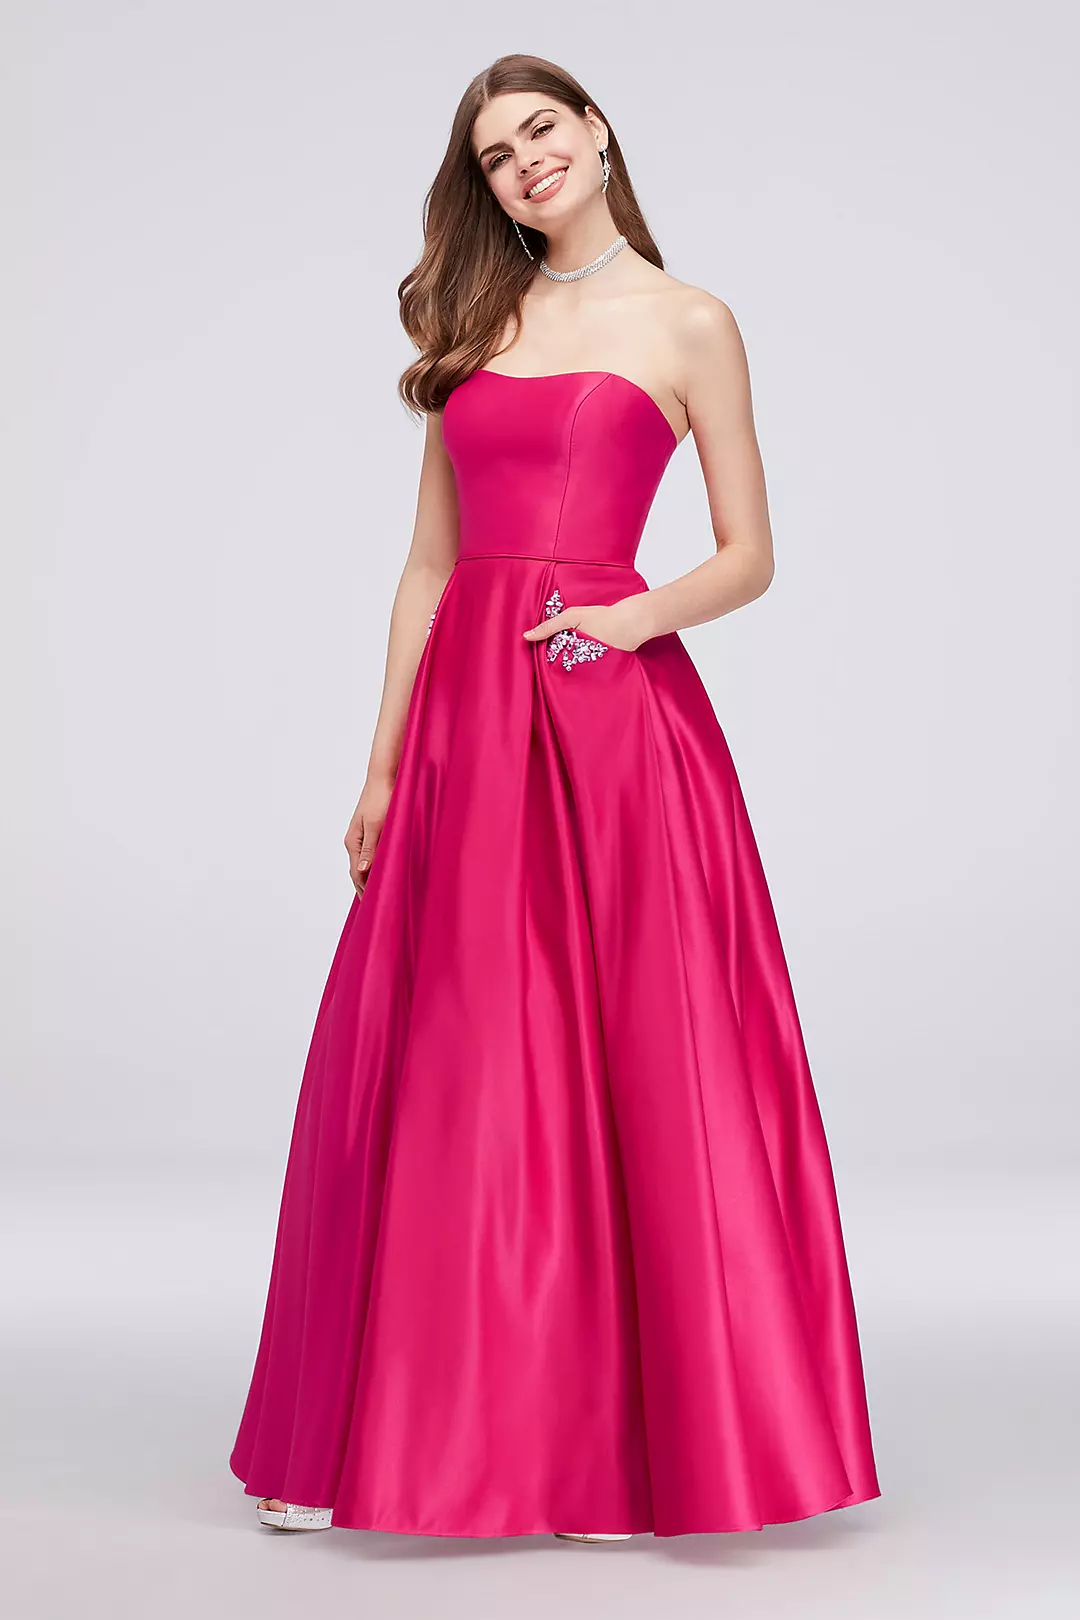 Satin Sweetheart Ball Gown with Crystal Pockets Image